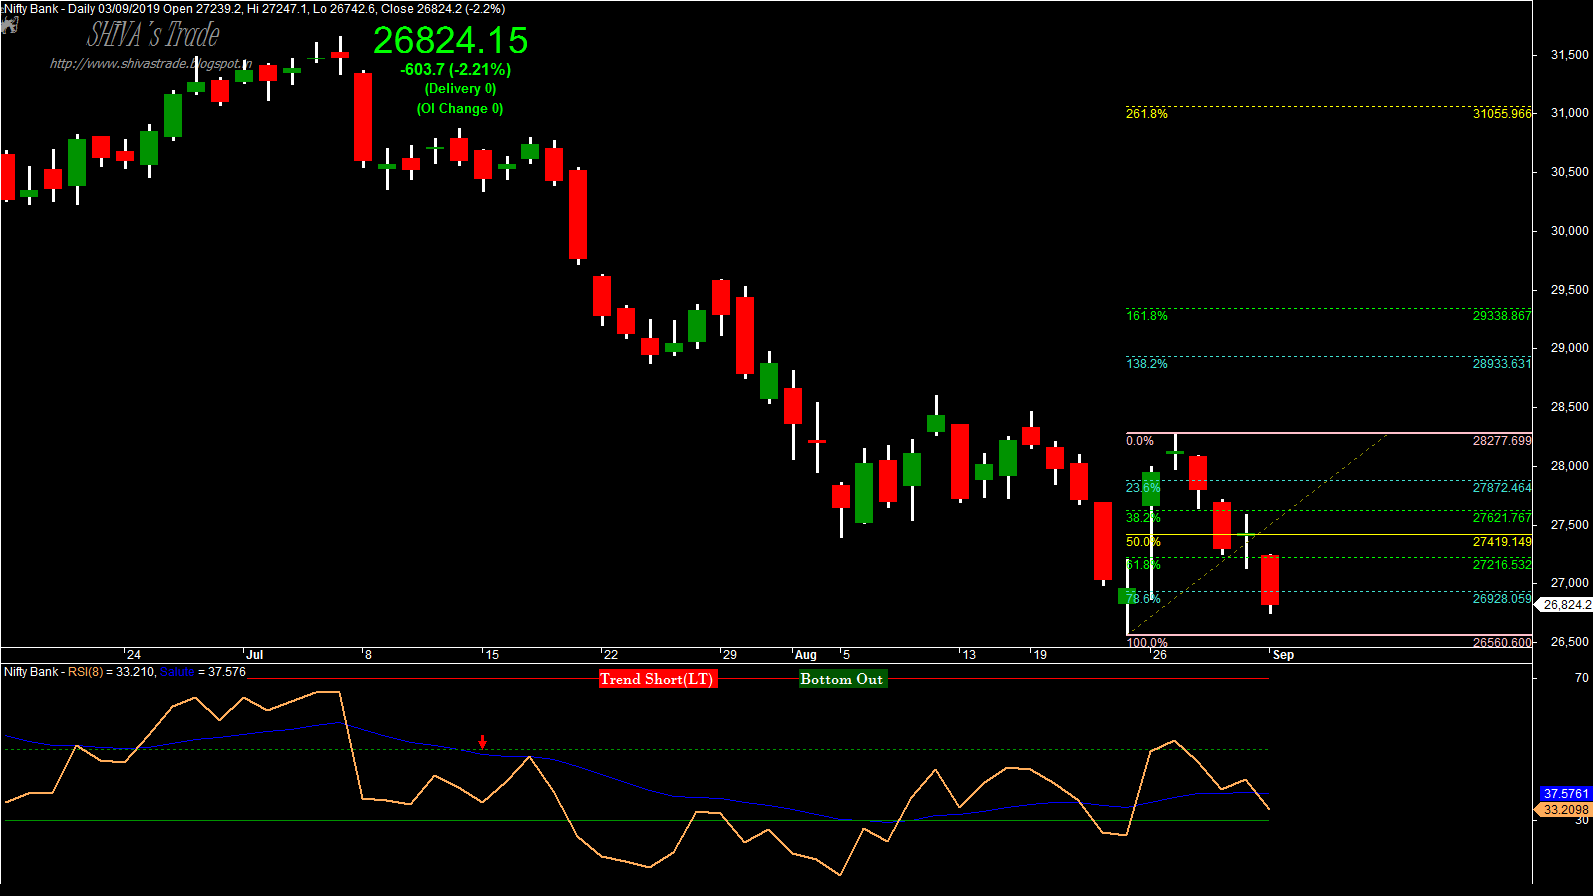 Nifty Rsi Live Chart Intra